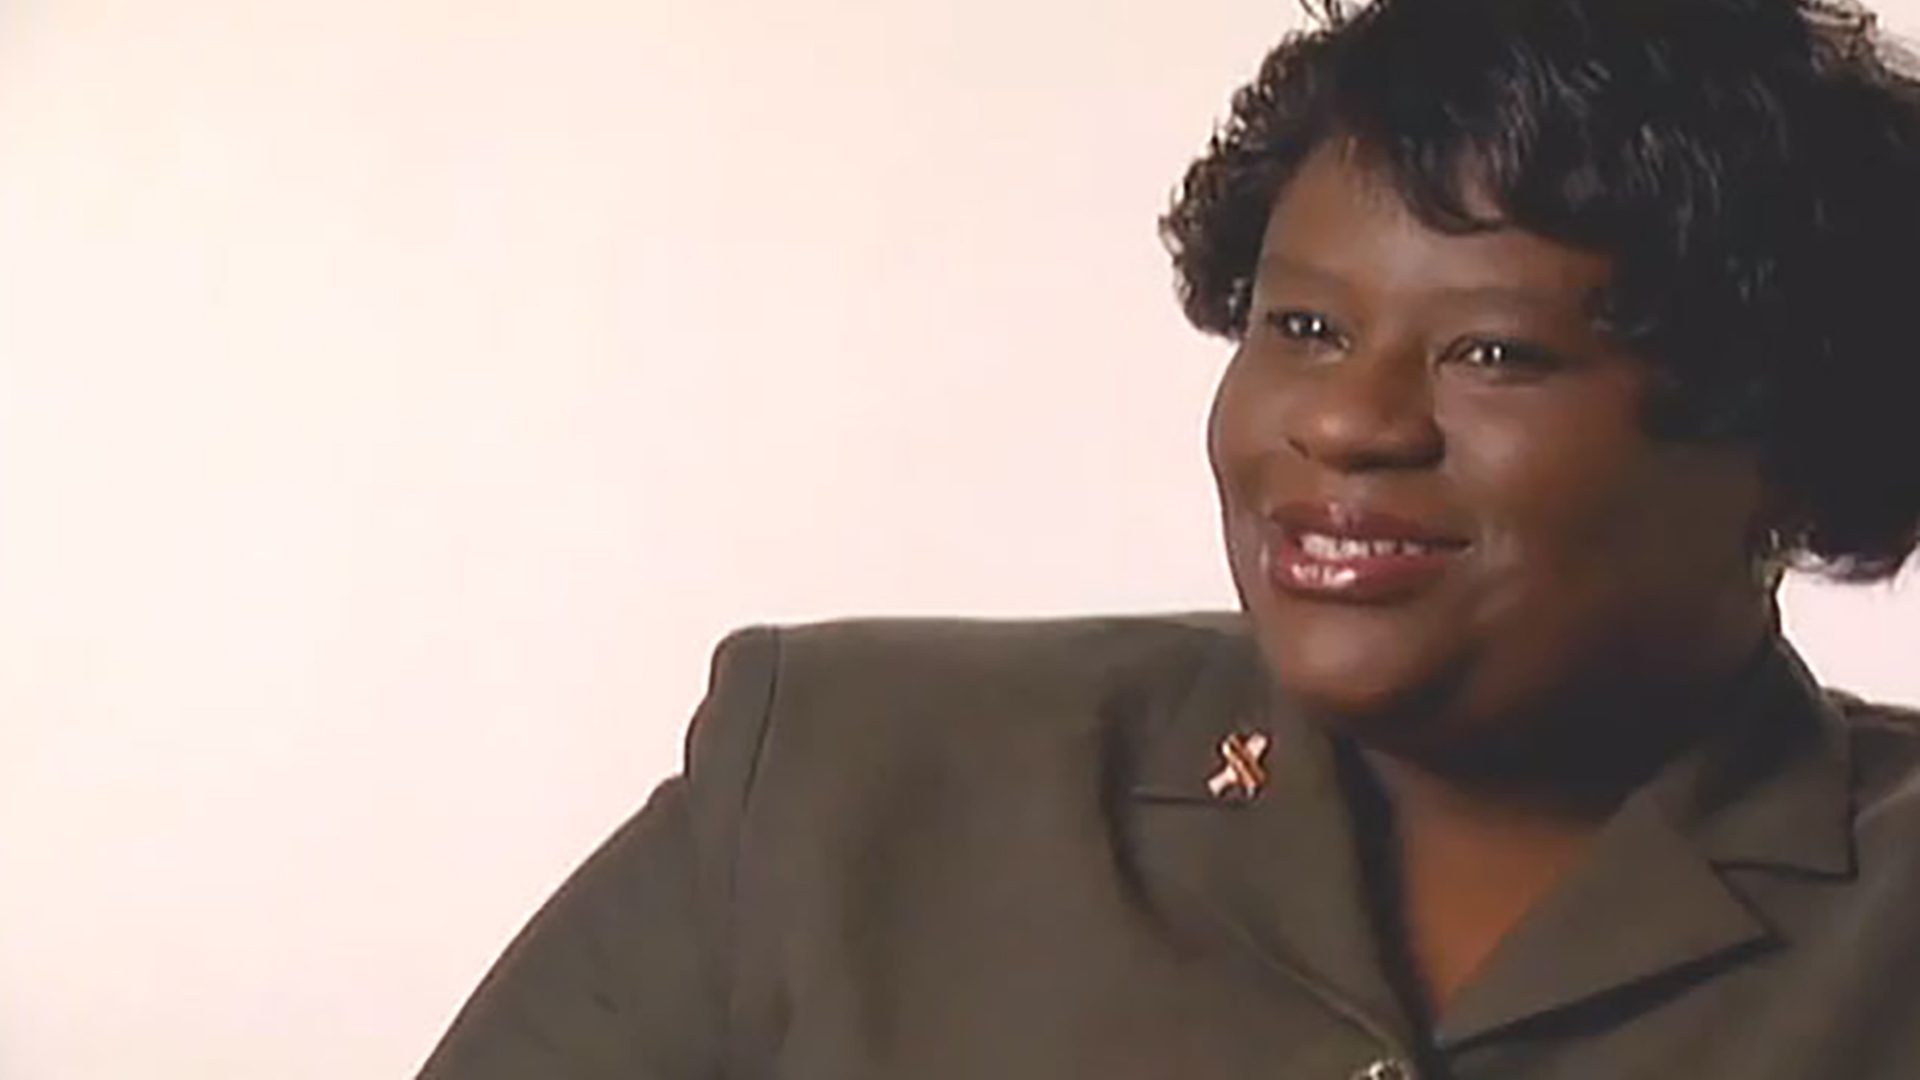 A woman wearing a suit jacket being interviewed against a white background.